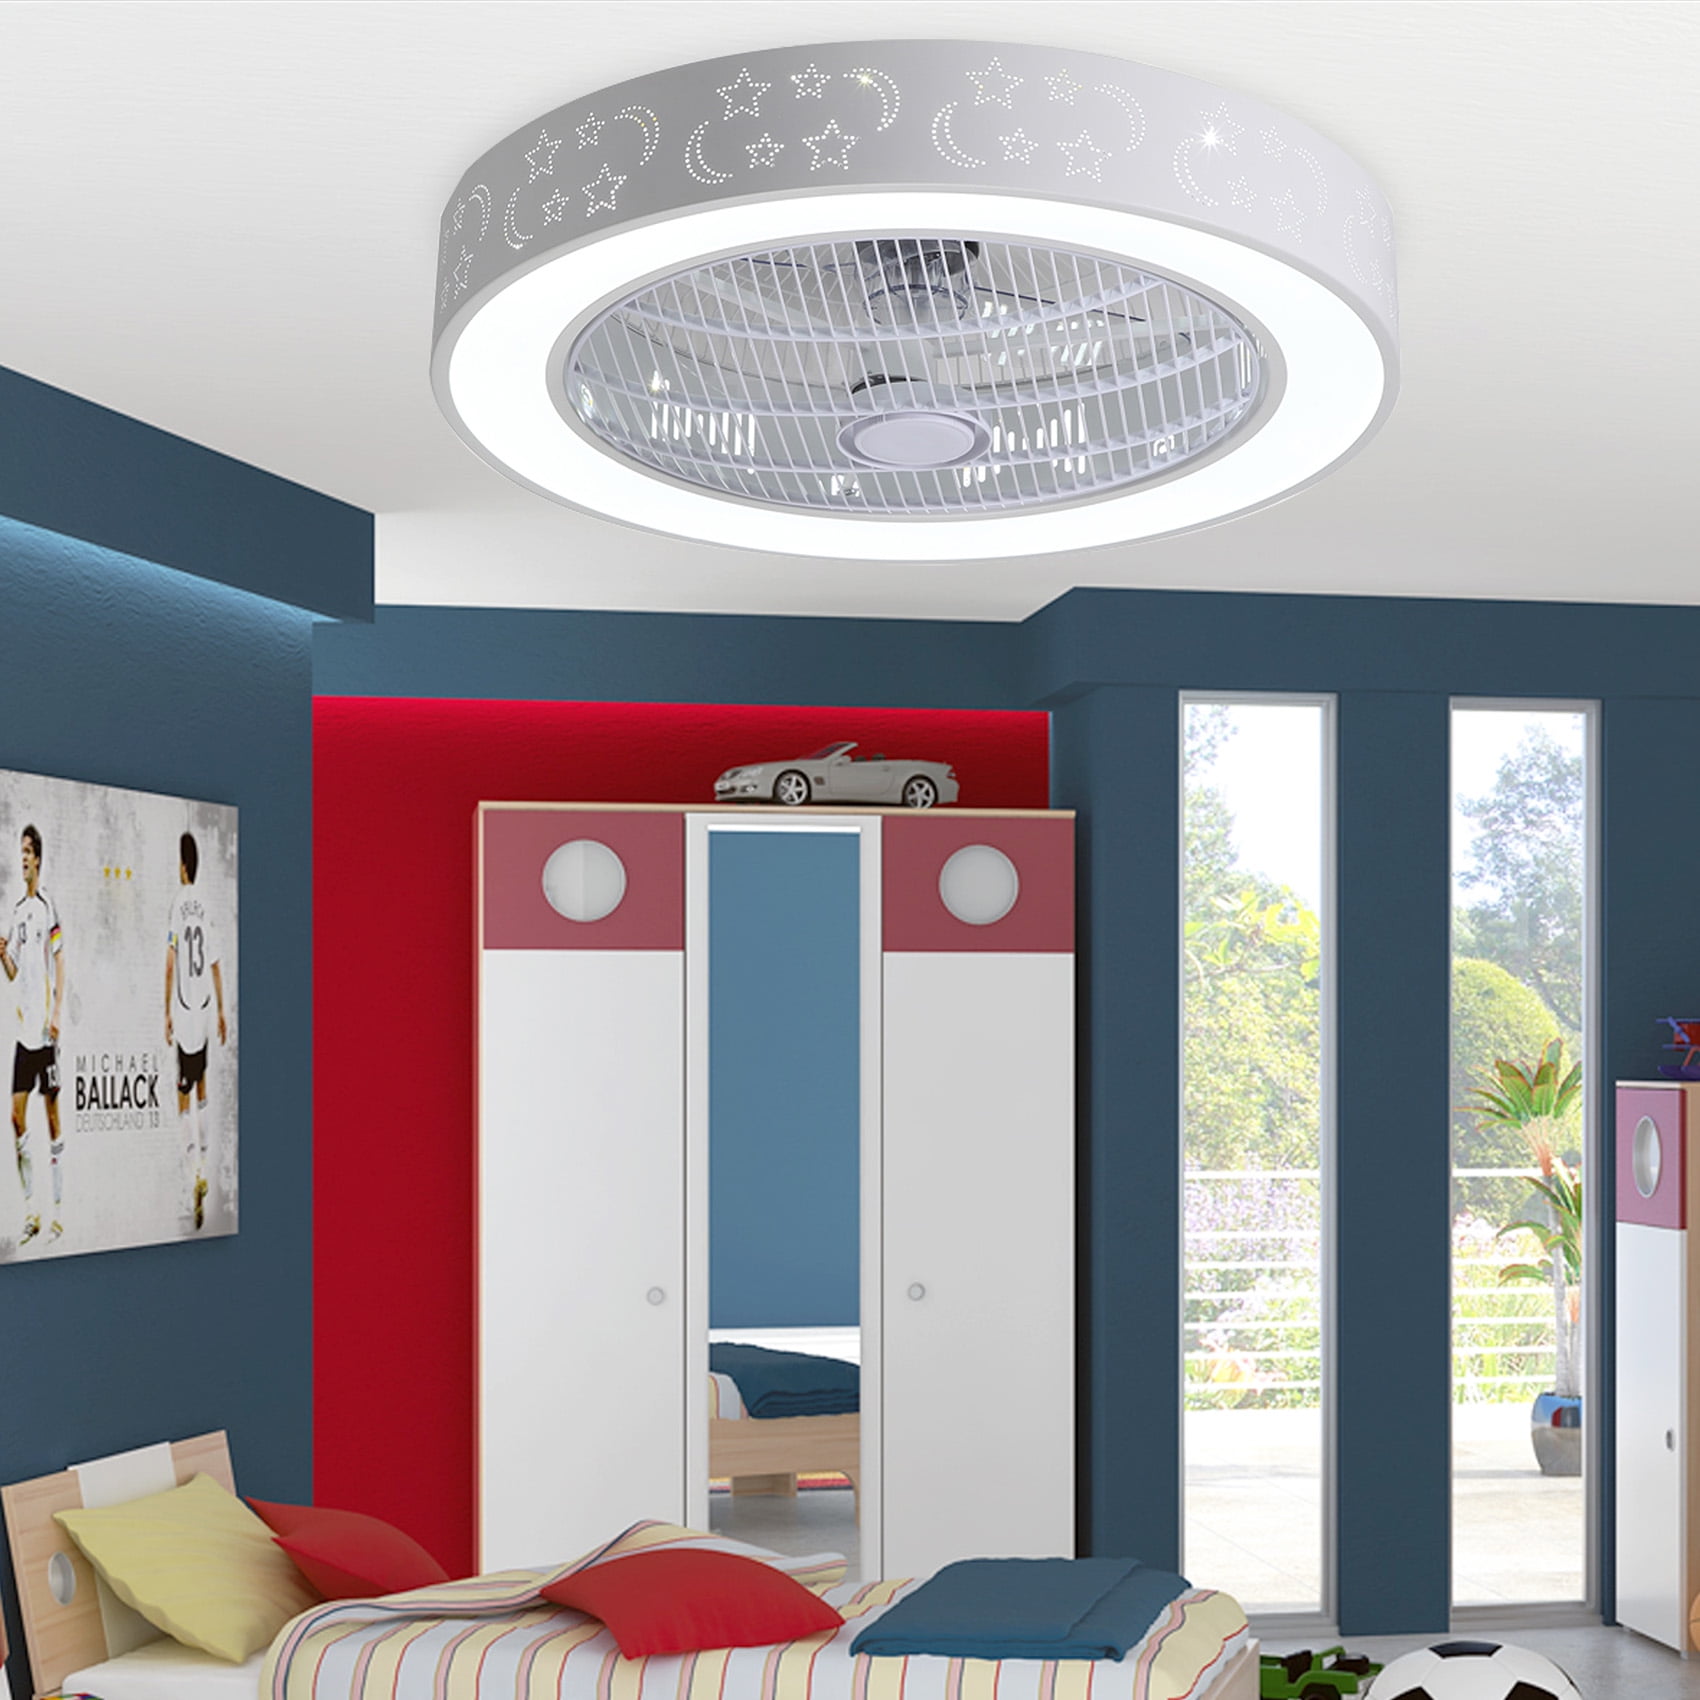 Details about   22 Inch Ceiling Fan with Light and Remote Control,Modern LED Semi Flush Mount US 